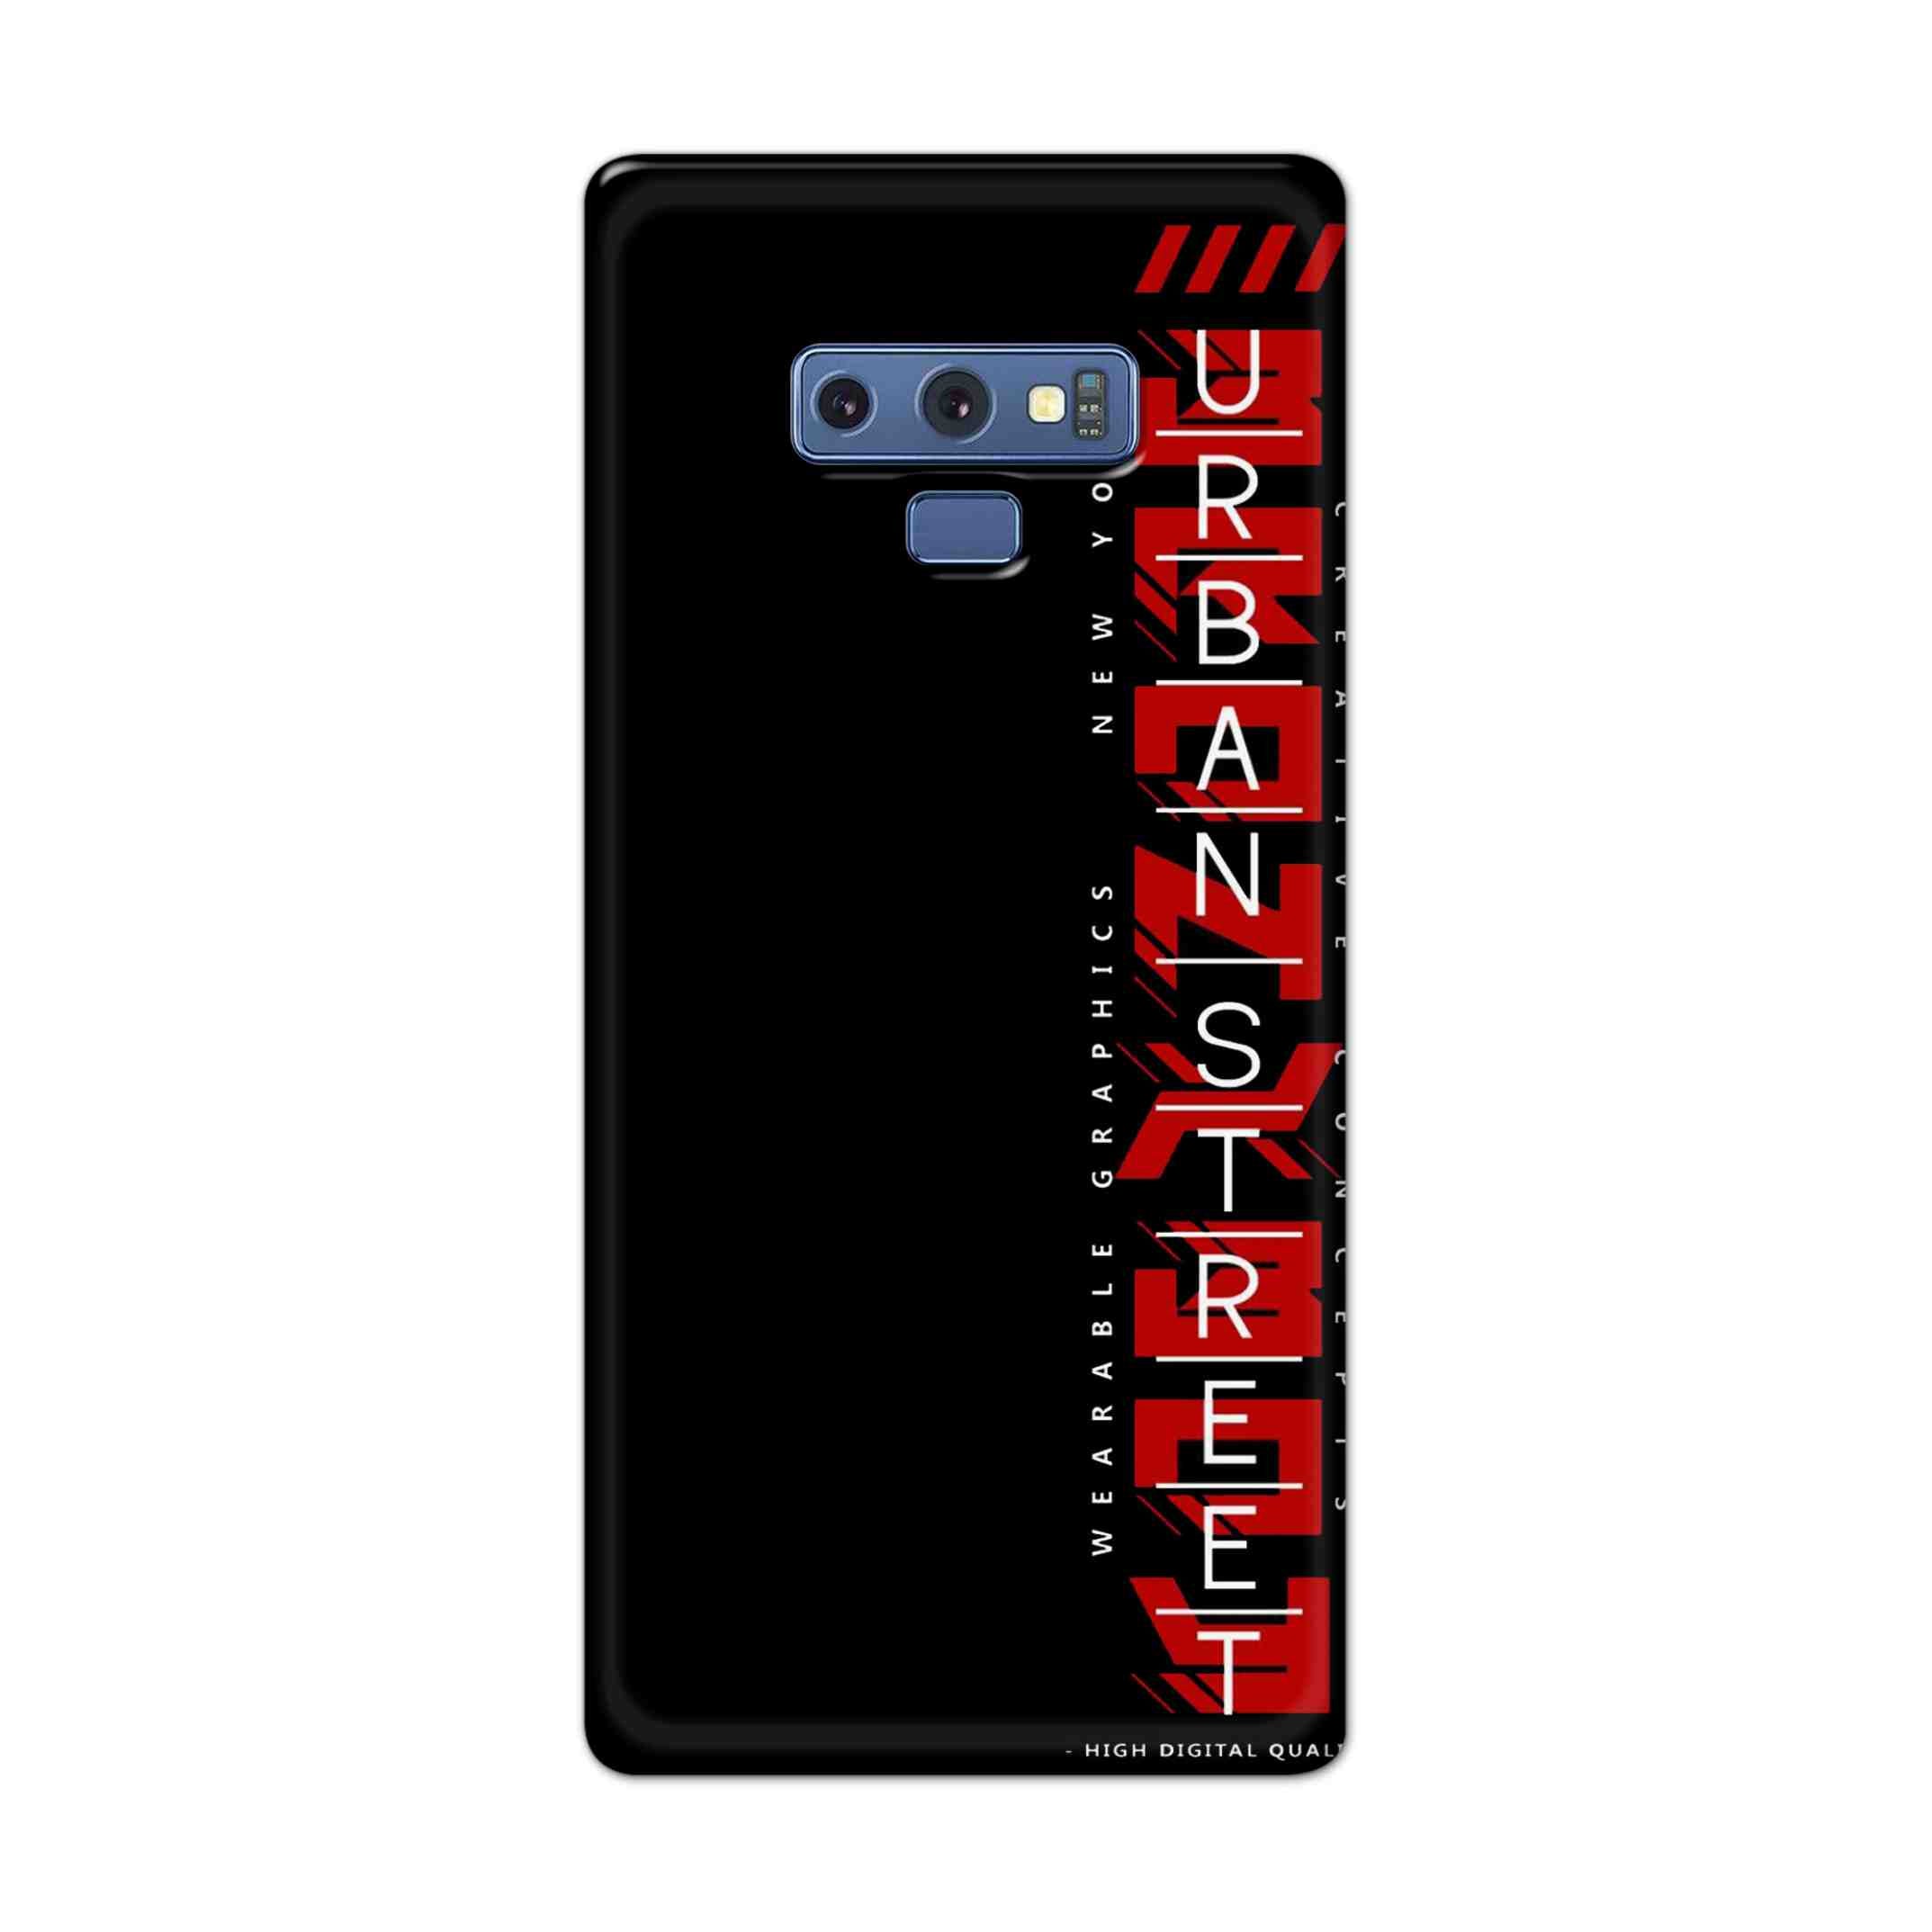 Buy Urban Street Hard Back Mobile Phone Case Cover For Samsung Galaxy Note 9 Online